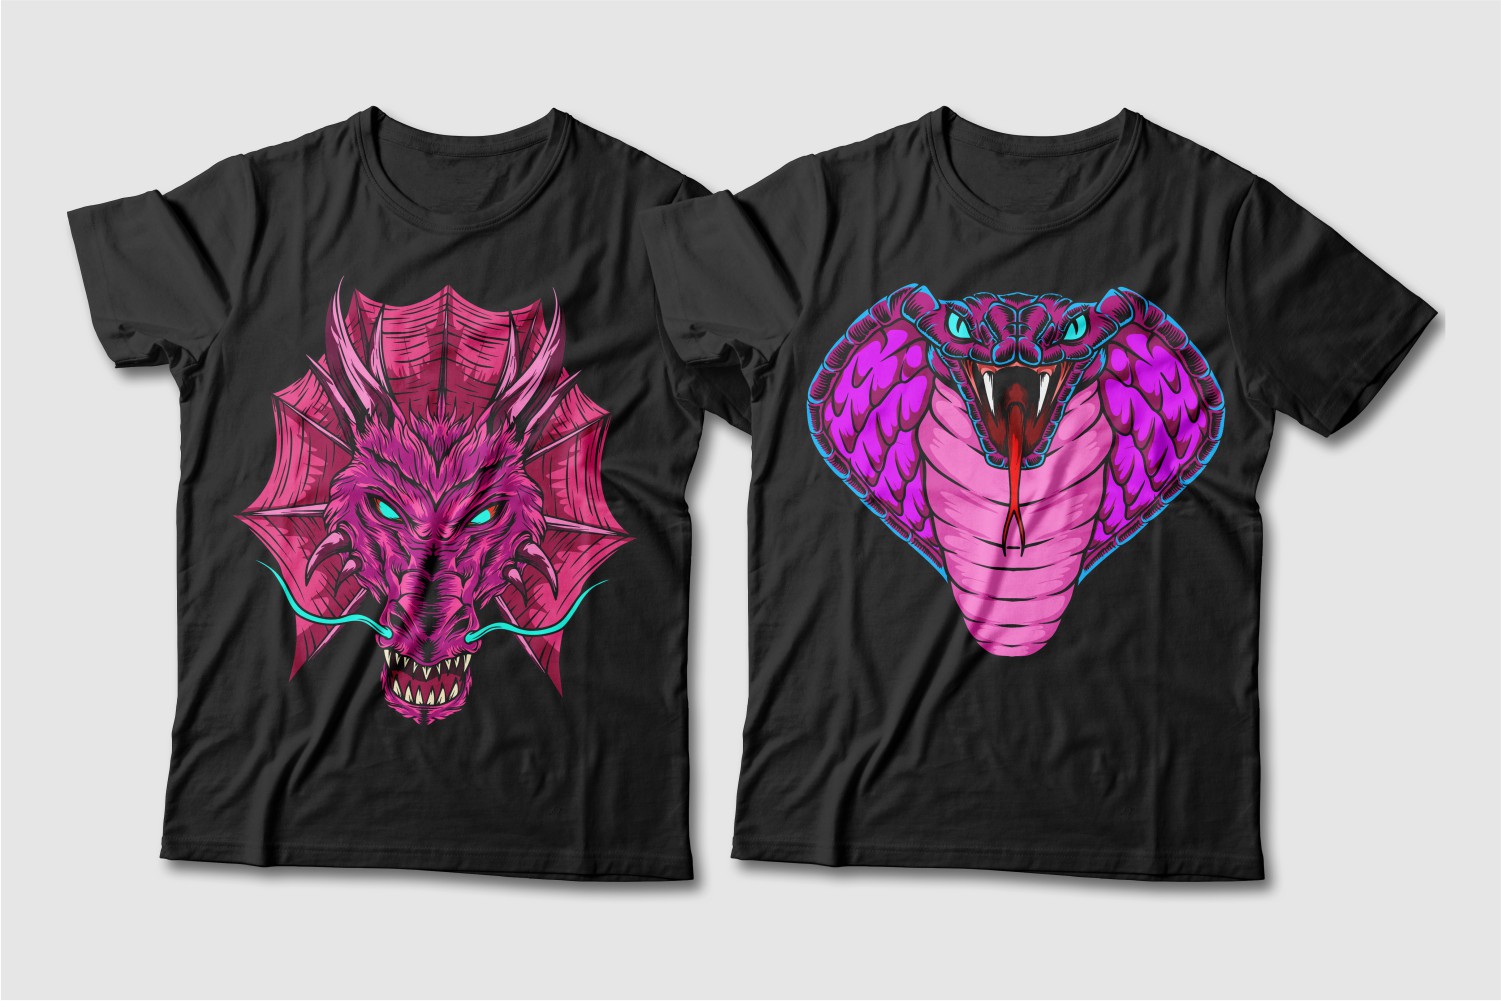 Black T-shirts featuring a dragon and a cobra in fuchsia color.